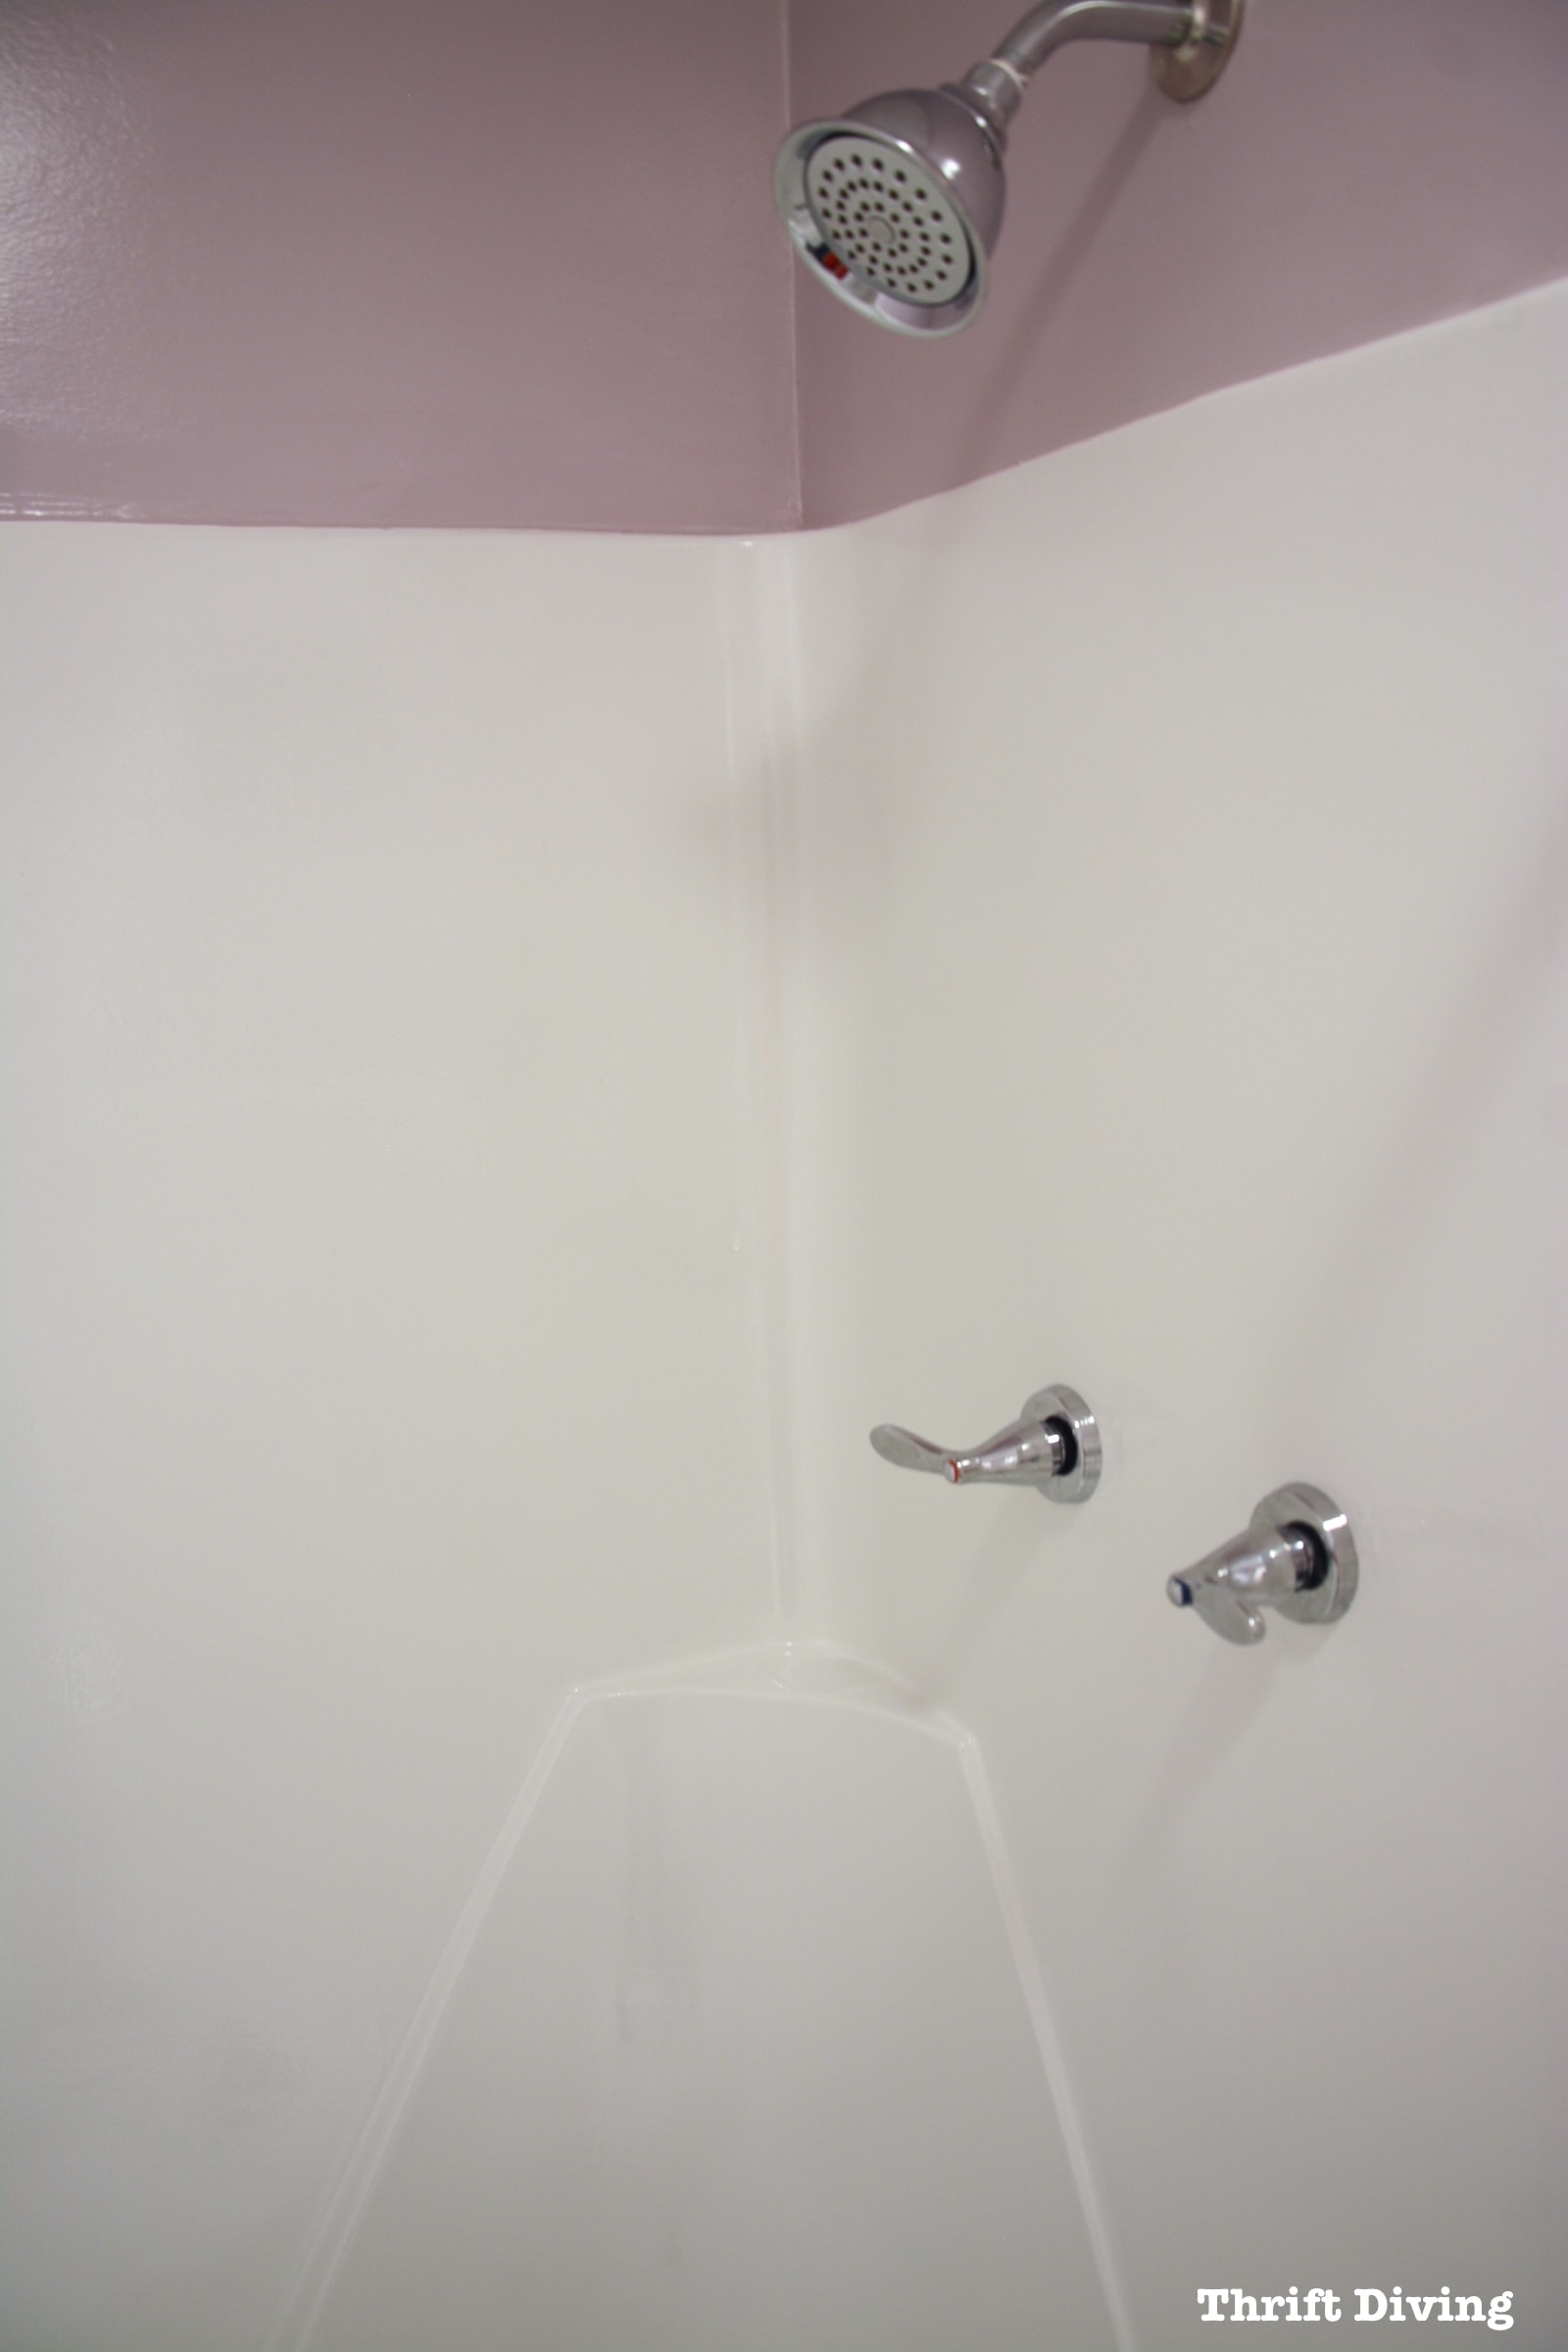 Shower-and-tub-refinishing-how-to-paint-a-shower-tub - Thrift Diving Blog - 9613